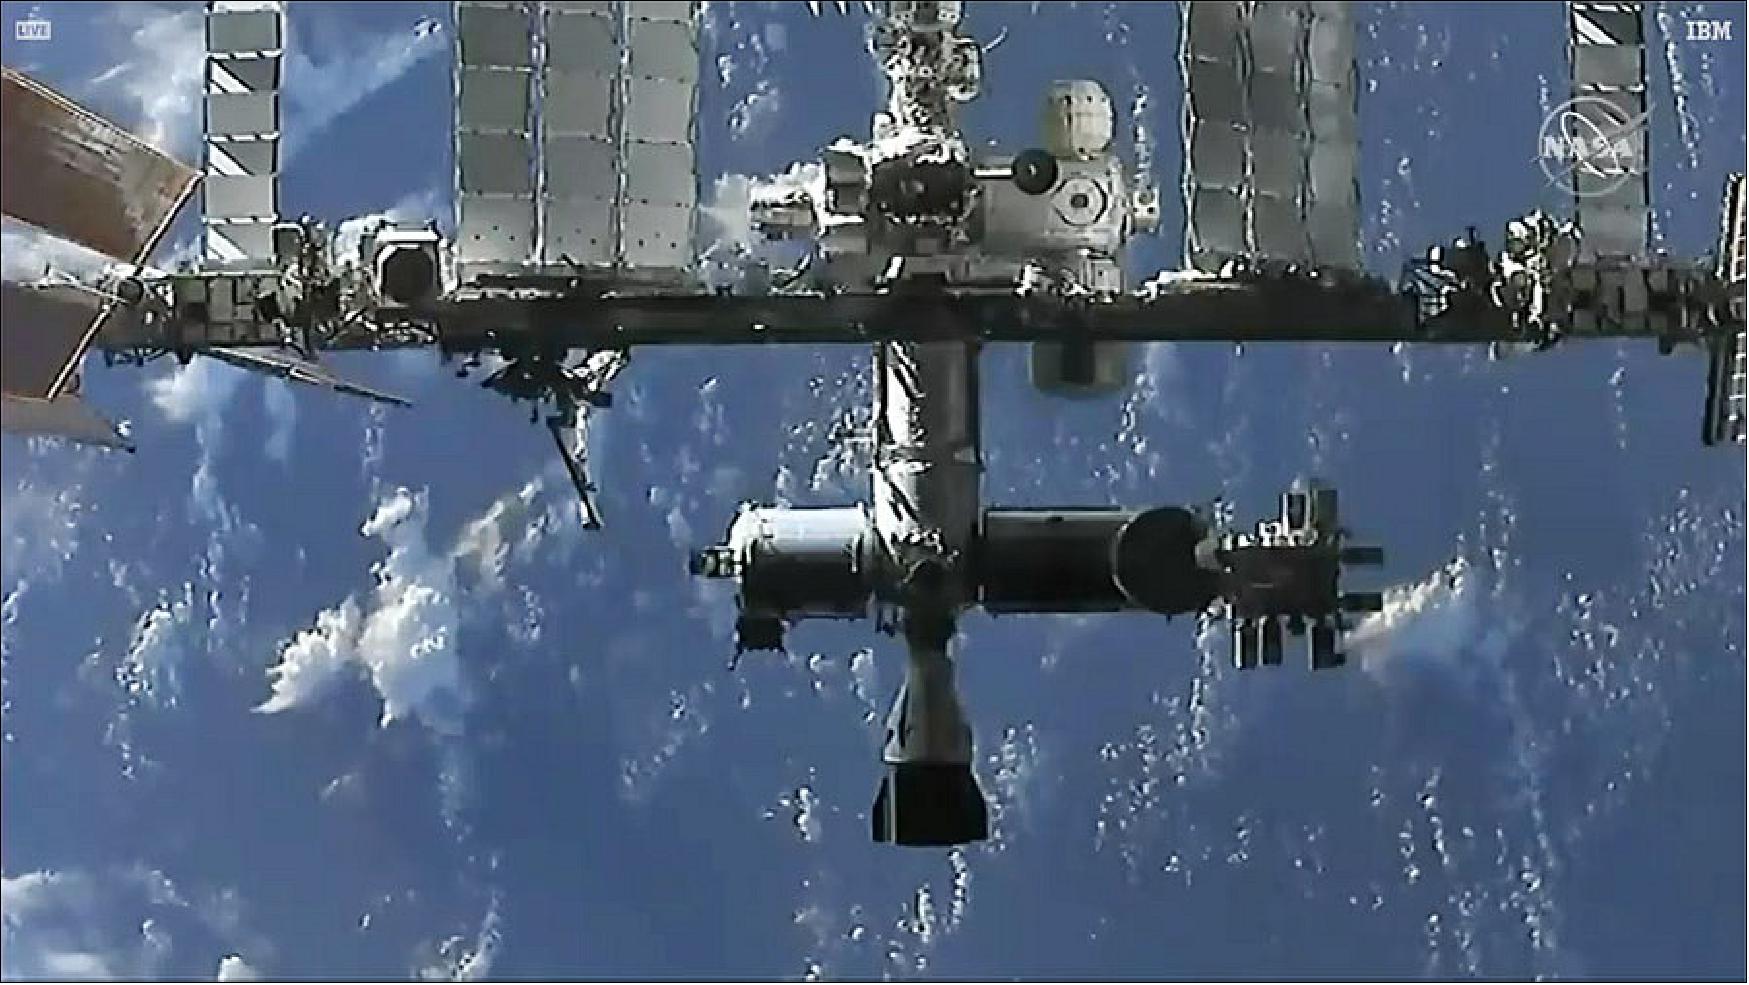 Figure 25: The space station is viewed from the SpaceX Cargo Dragon during its automated approach before docking (image credit: NASA TV)